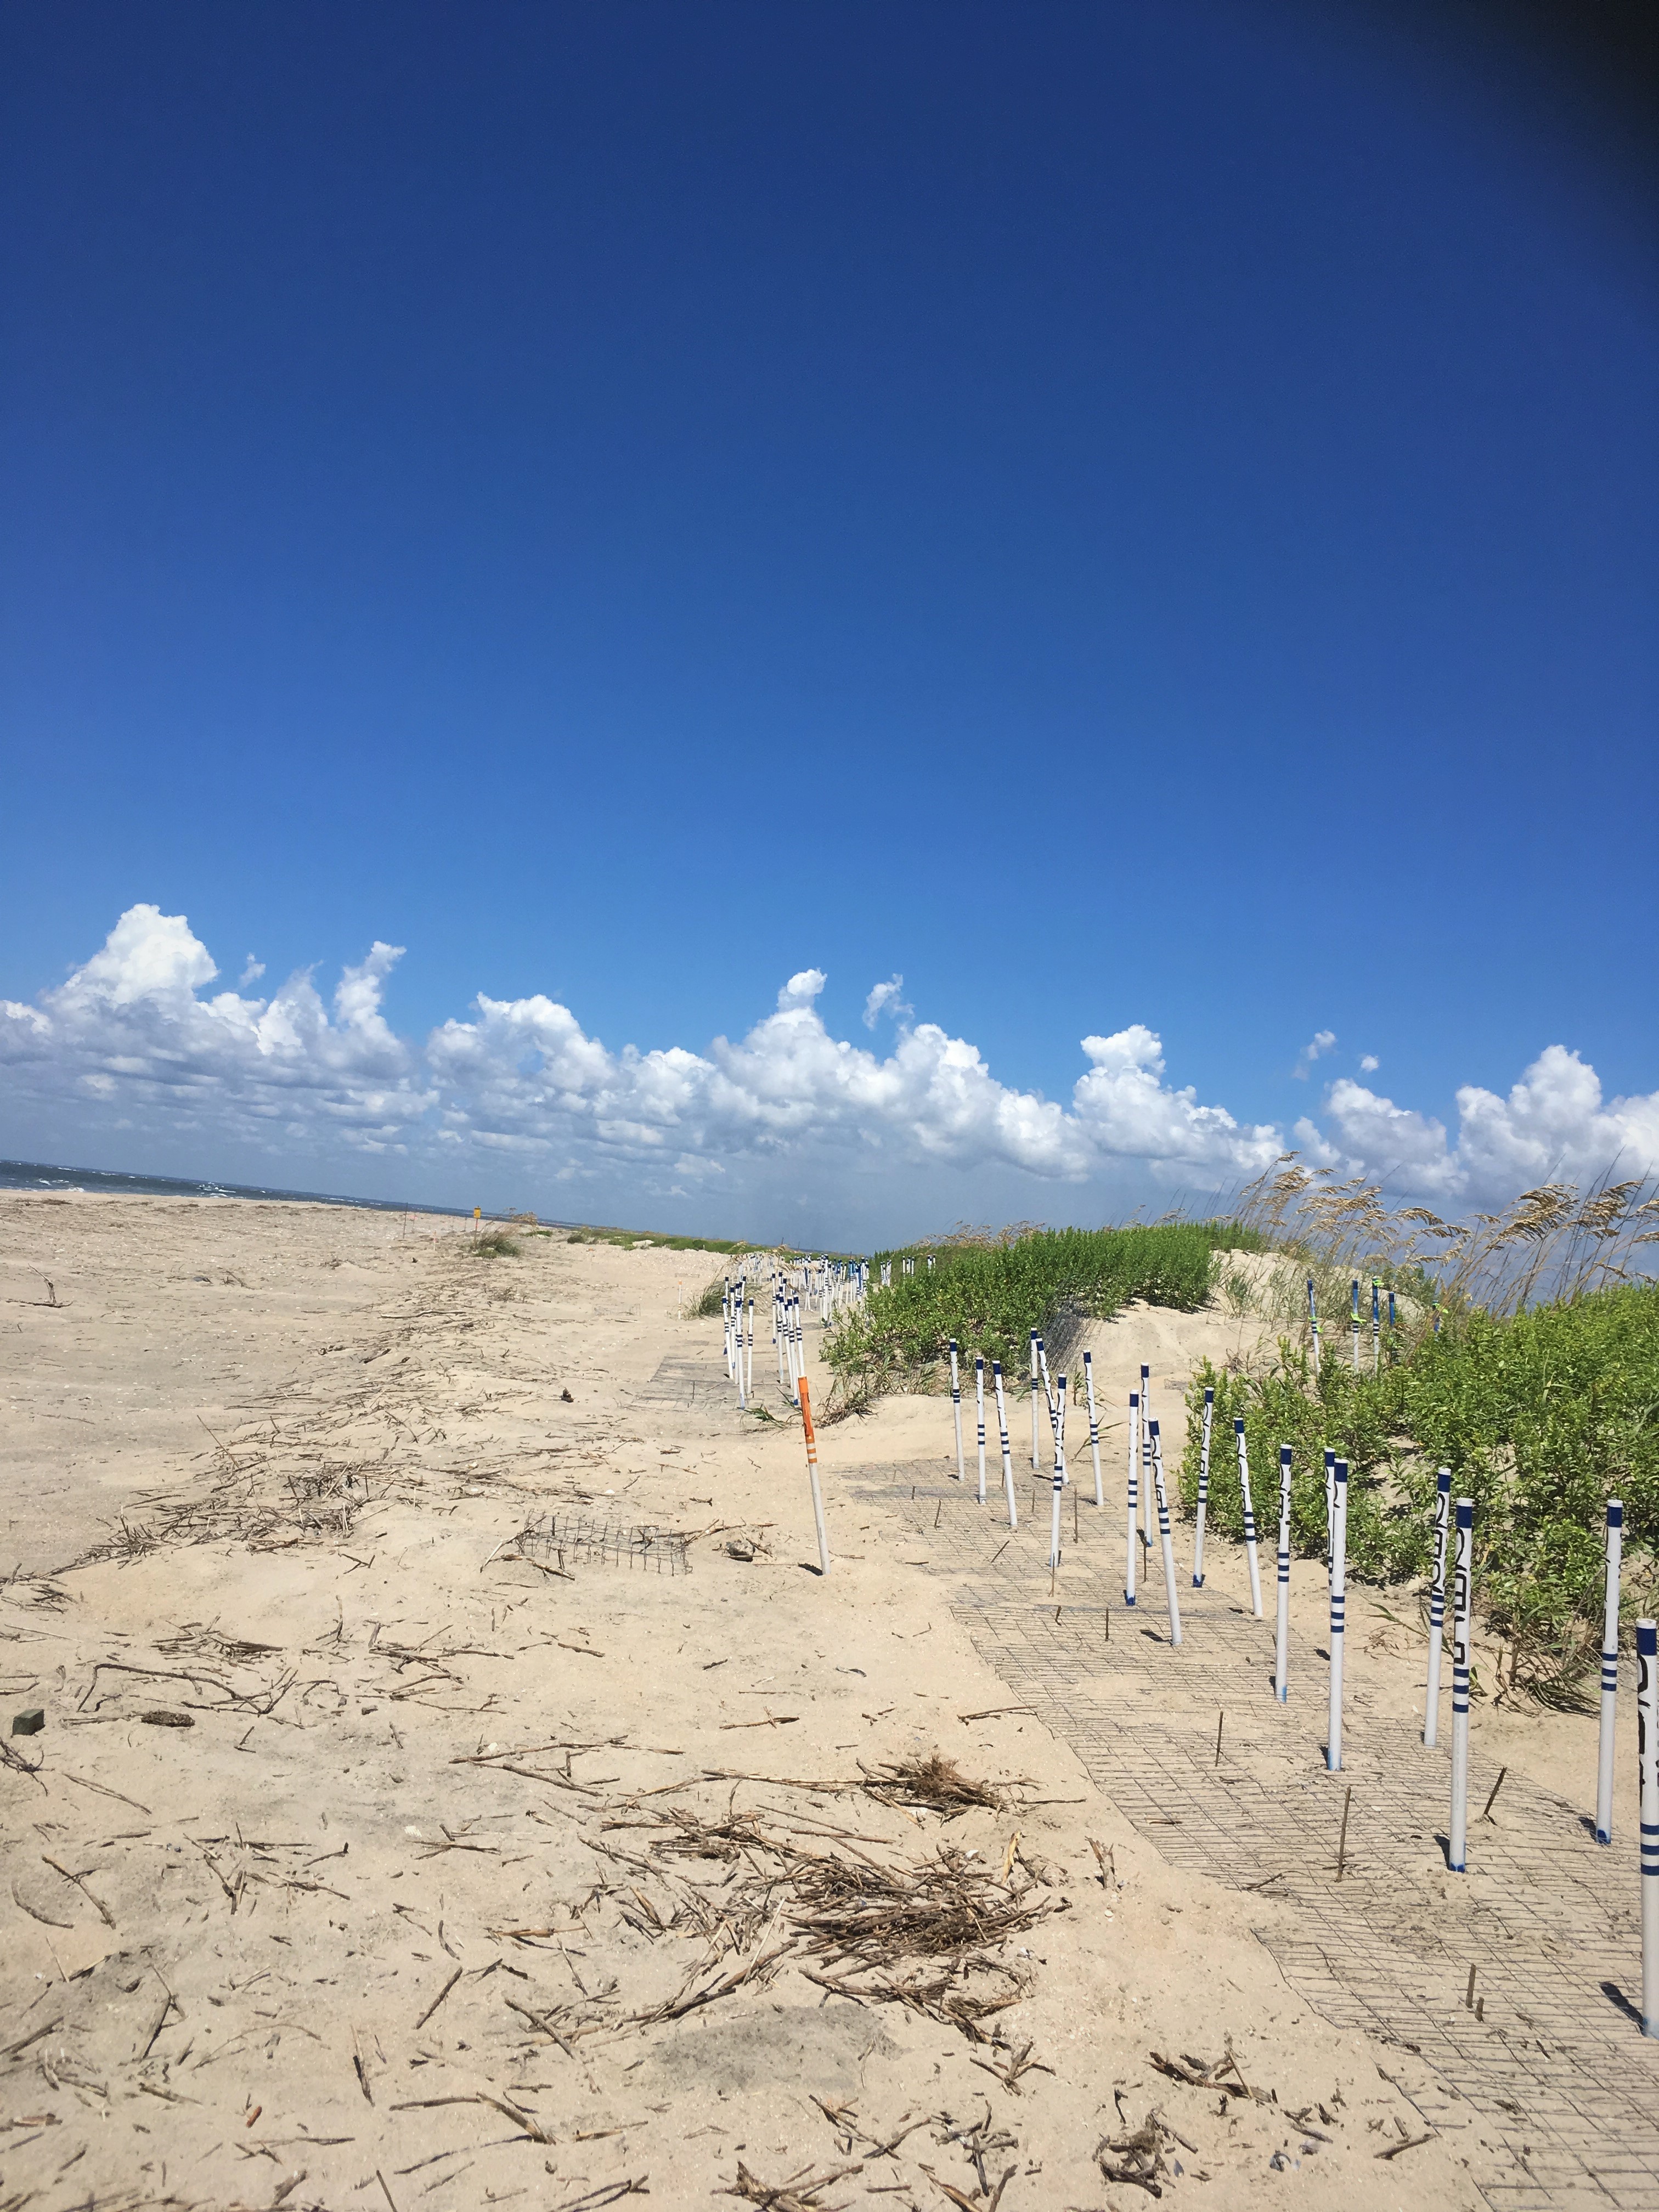 Relocated Loggerhead nests on the beach, marked with numbered poles and wire laid on top of nests on the sand, are lined up close to the dunes as far as the eye can see. 